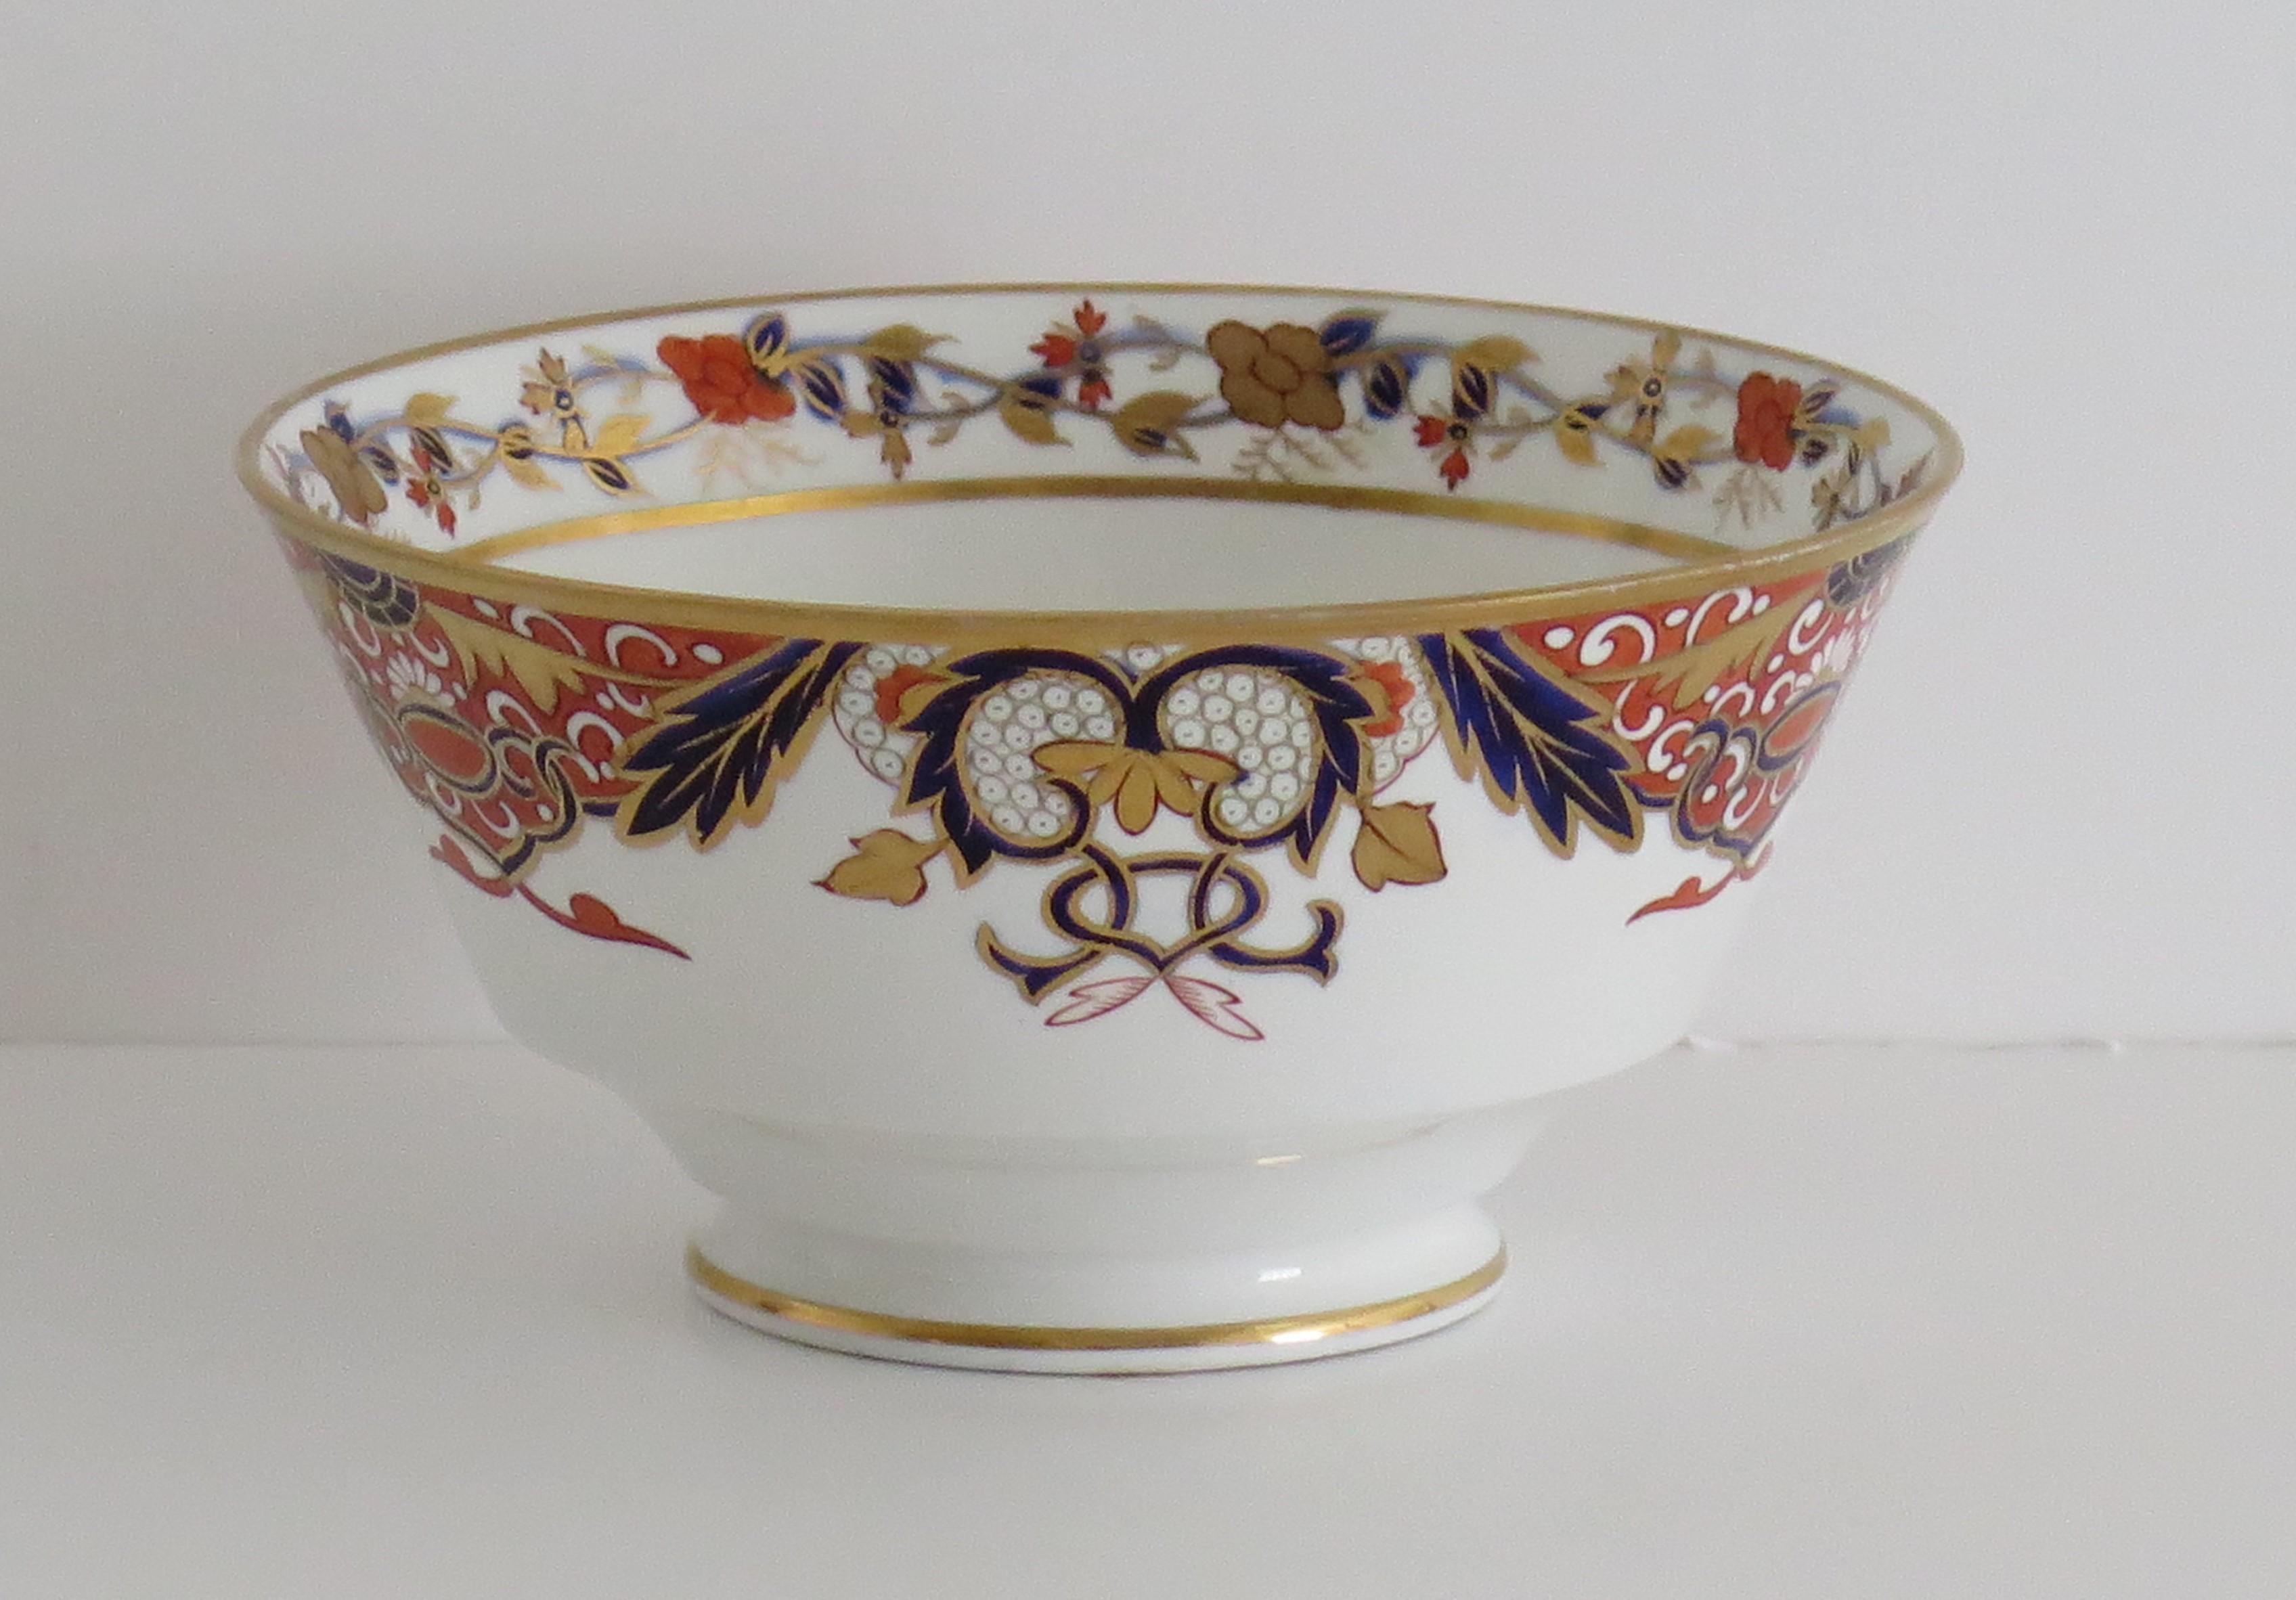 George III Early 19th Century Spode Porcelain Slop Bowl in Japan Ptn 1946, circa 1810 For Sale